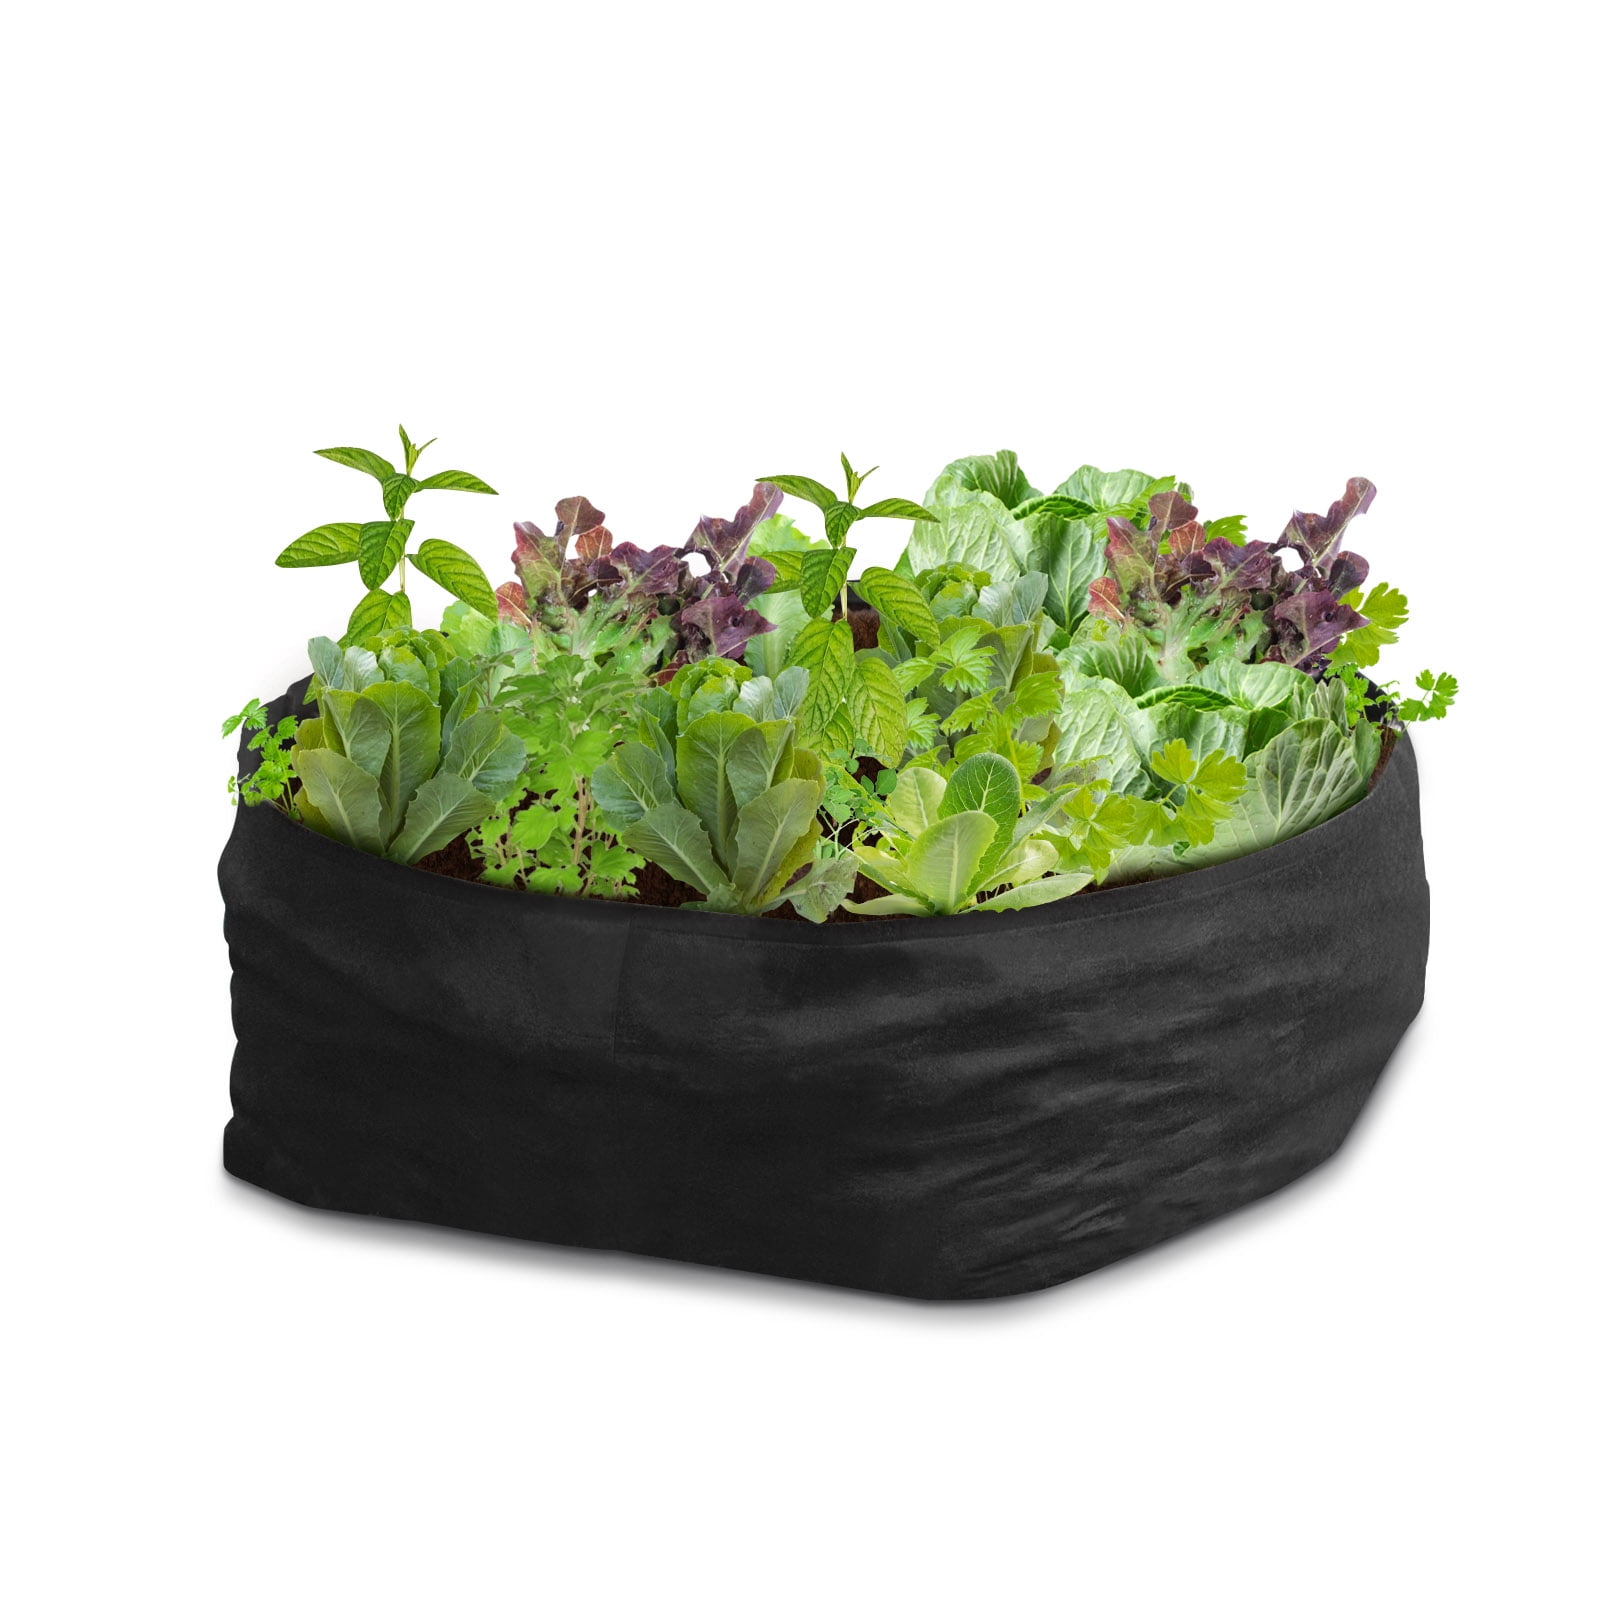 2pcs Plant Grow Bags Garden Planter for Planting Flowers Herbs Vegetables 